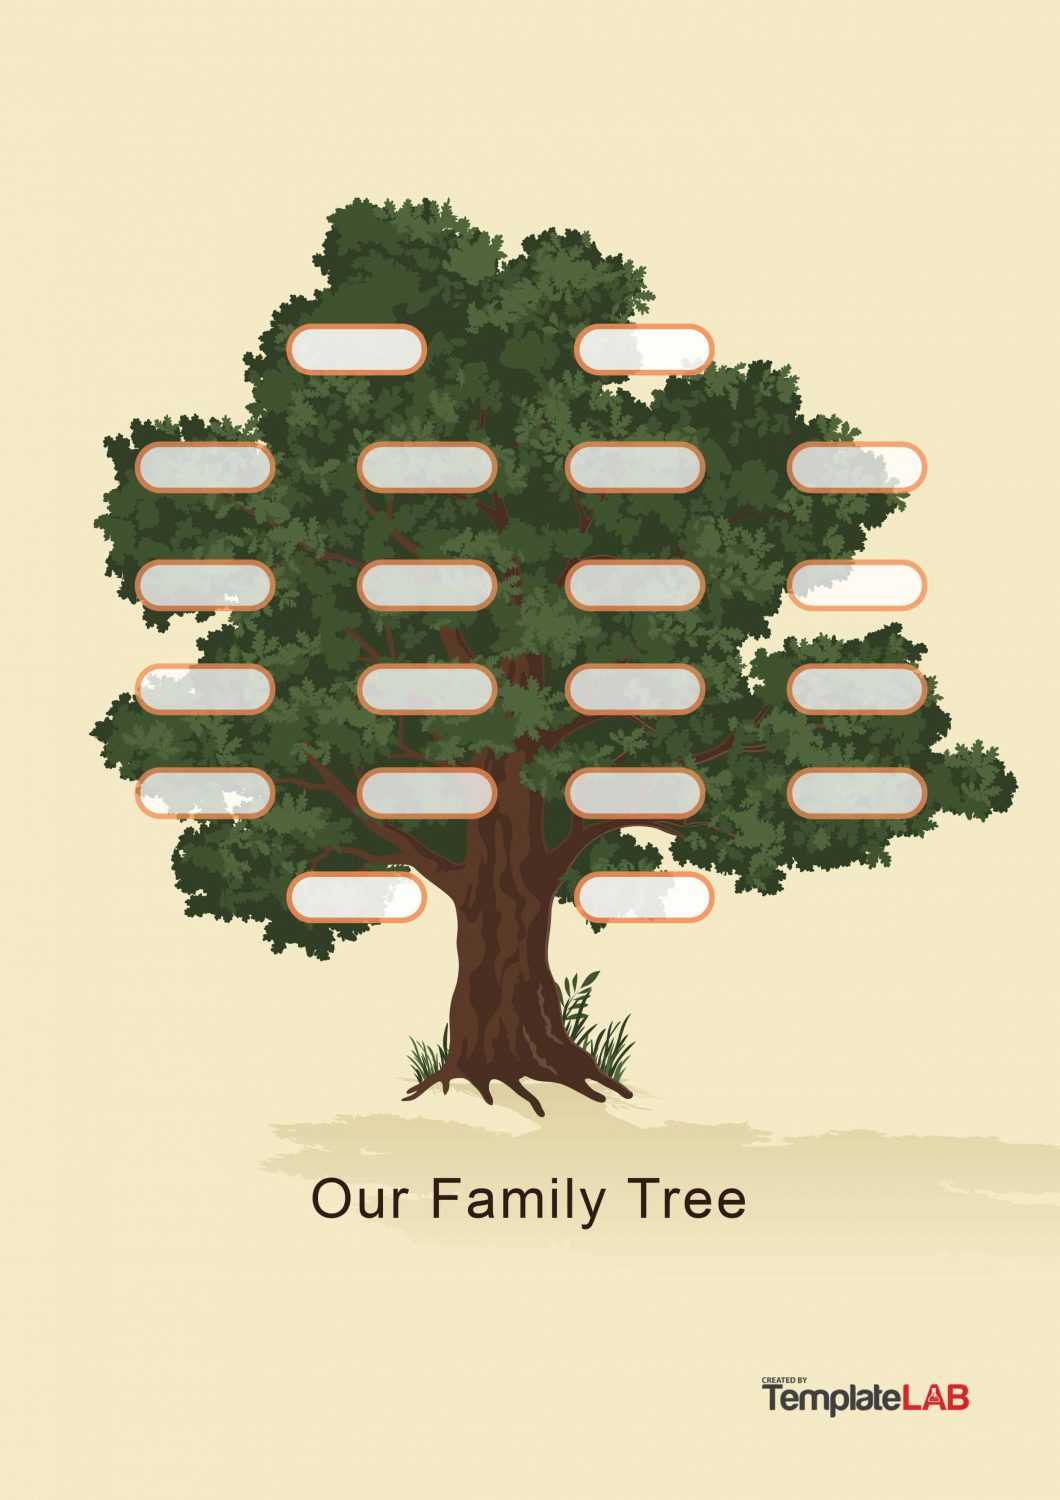 41+ Free Family Tree Templates (Word, Excel, Pdf) ᐅ Templatelab Throughout 3 Generation Family Tree Template Word